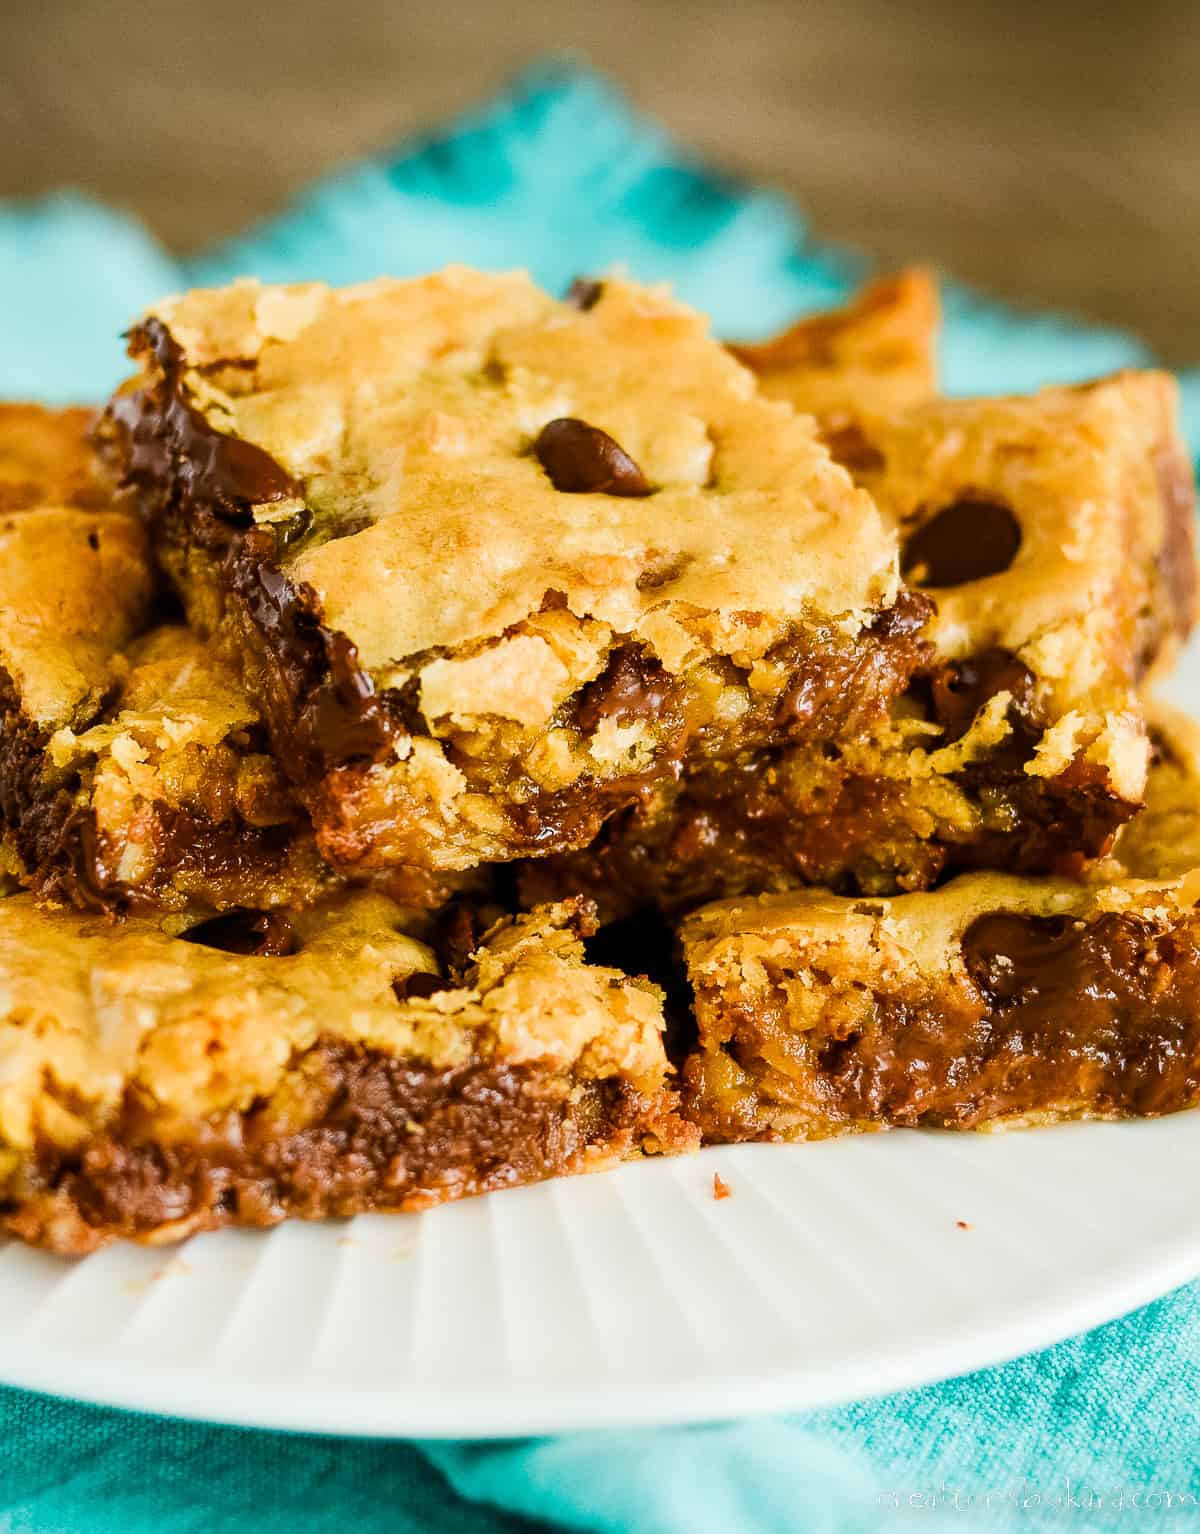 plate of warm and gooey chocolate chip oatmeal bars on a blue fabric napkin